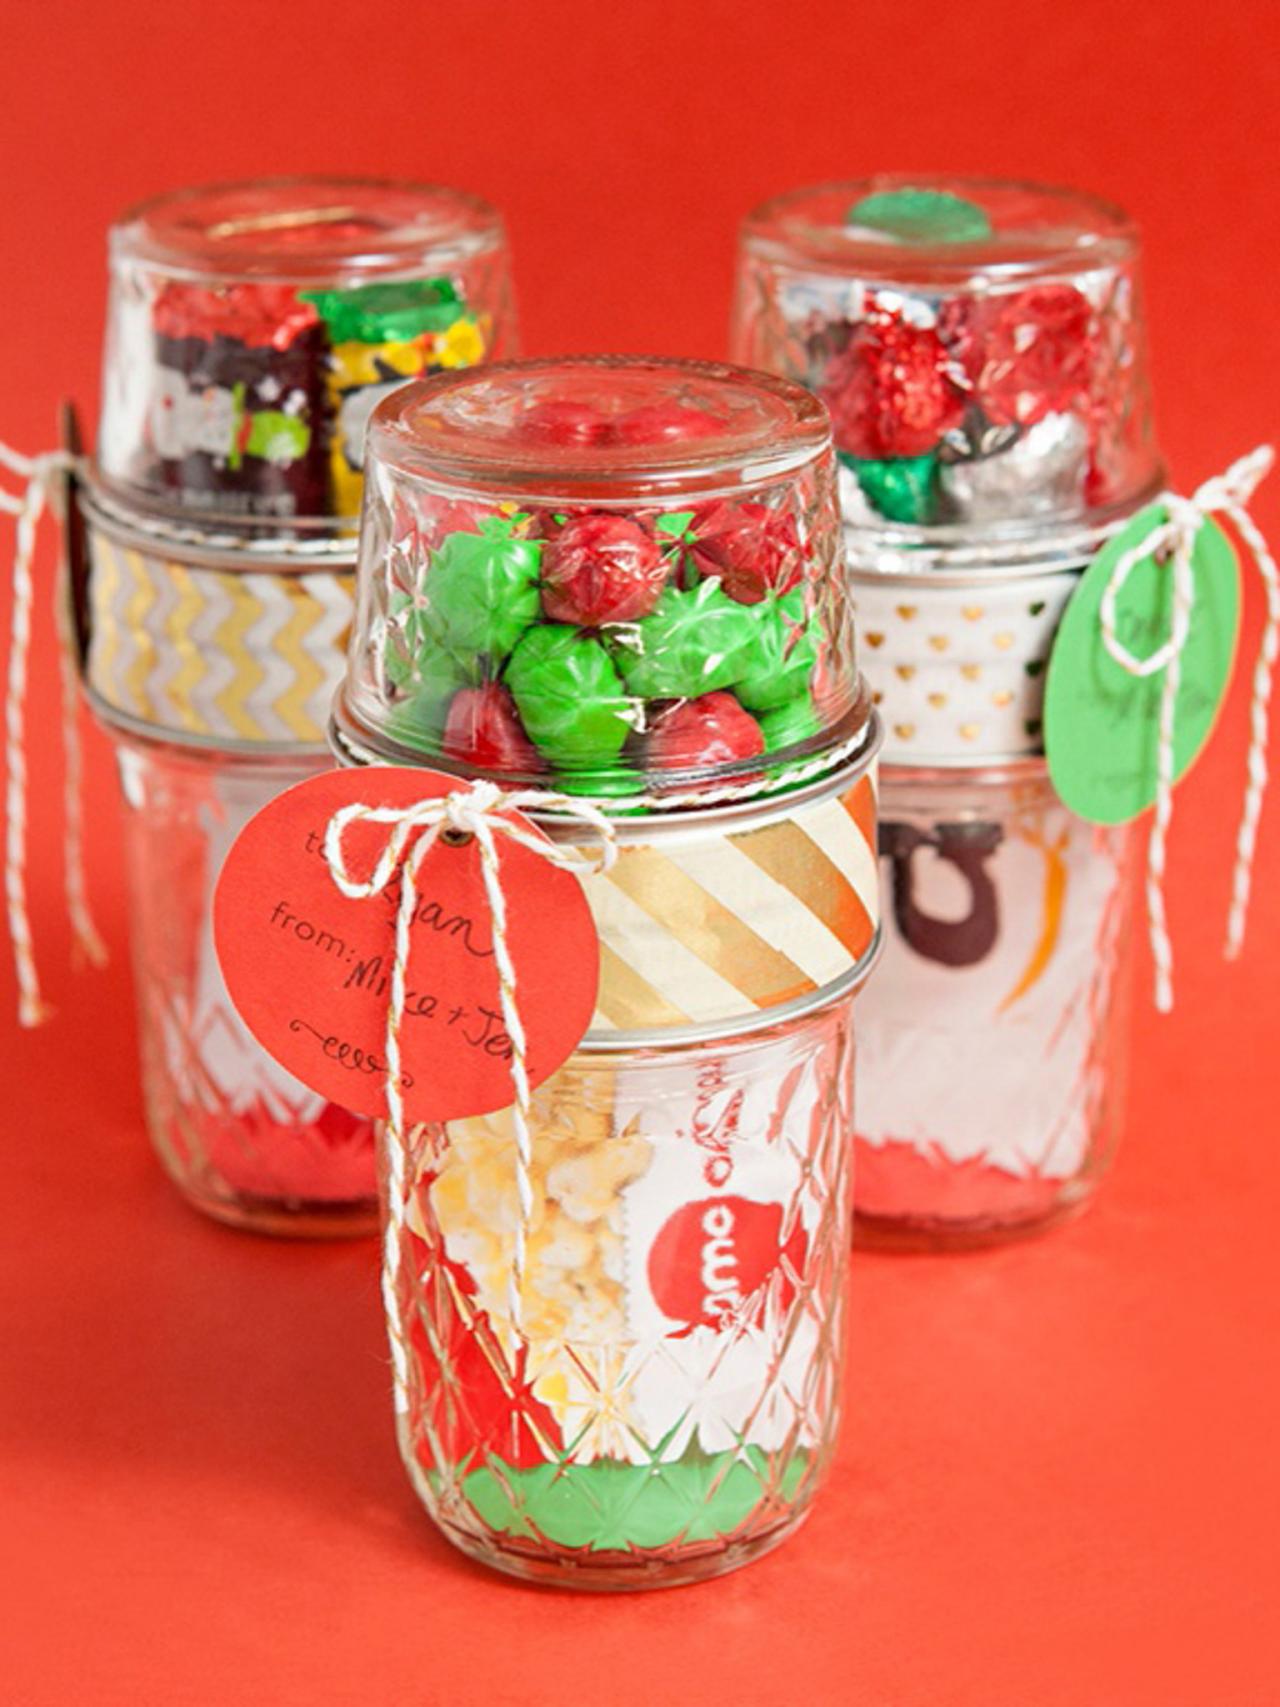 Mason jars have many uses and one is as gift wrapper.